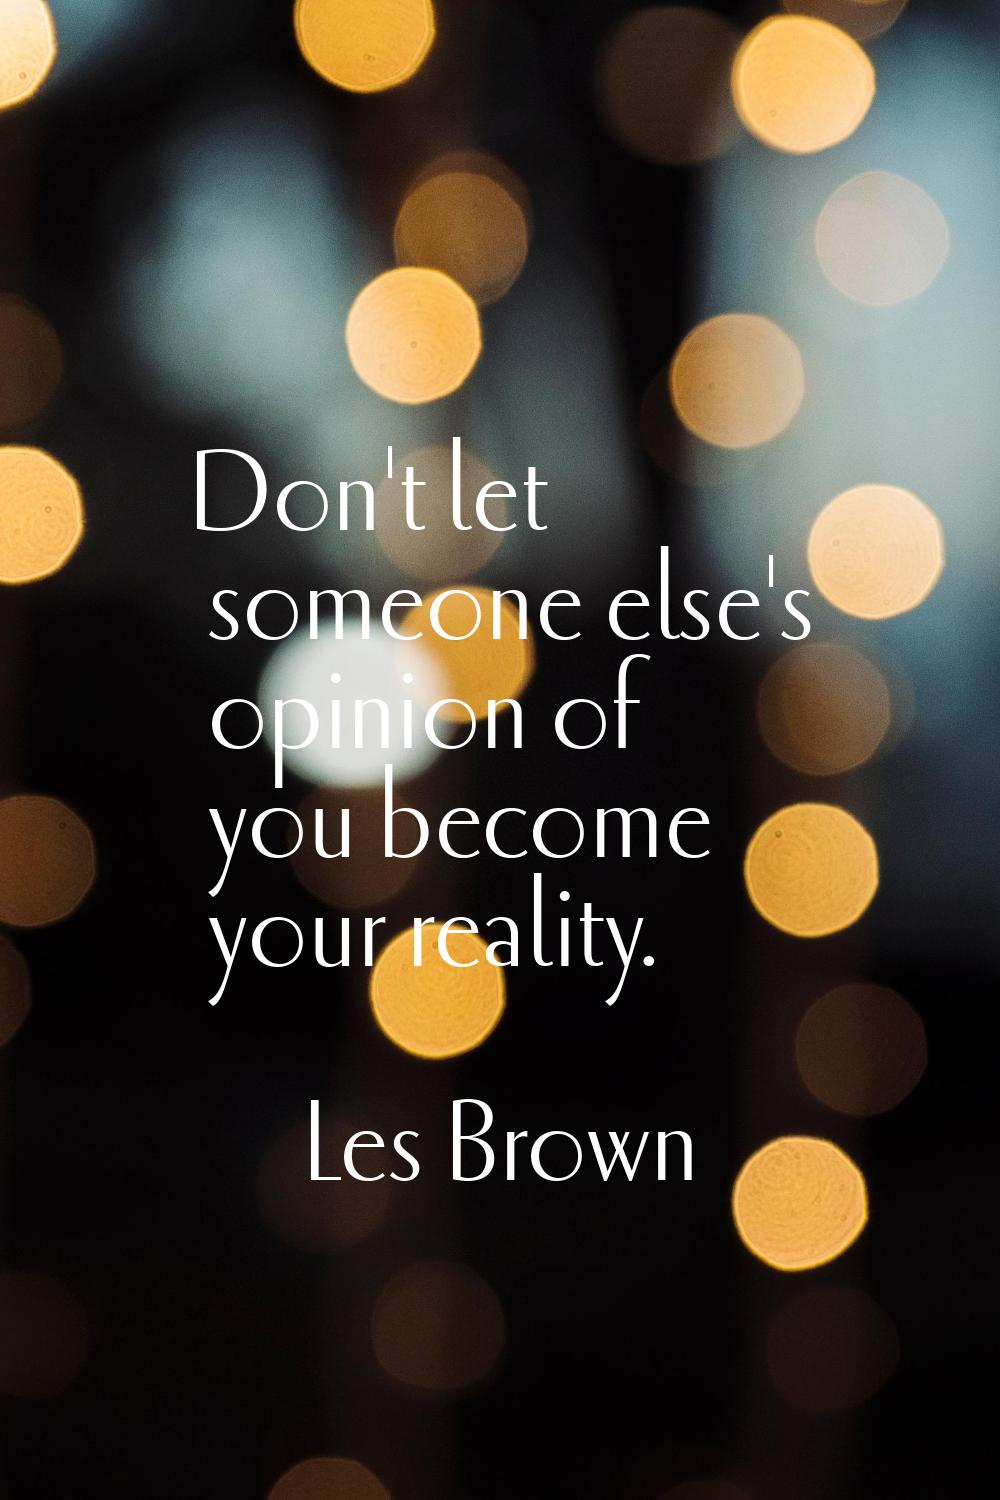 Don't let someone else's opinion of you become your reality.